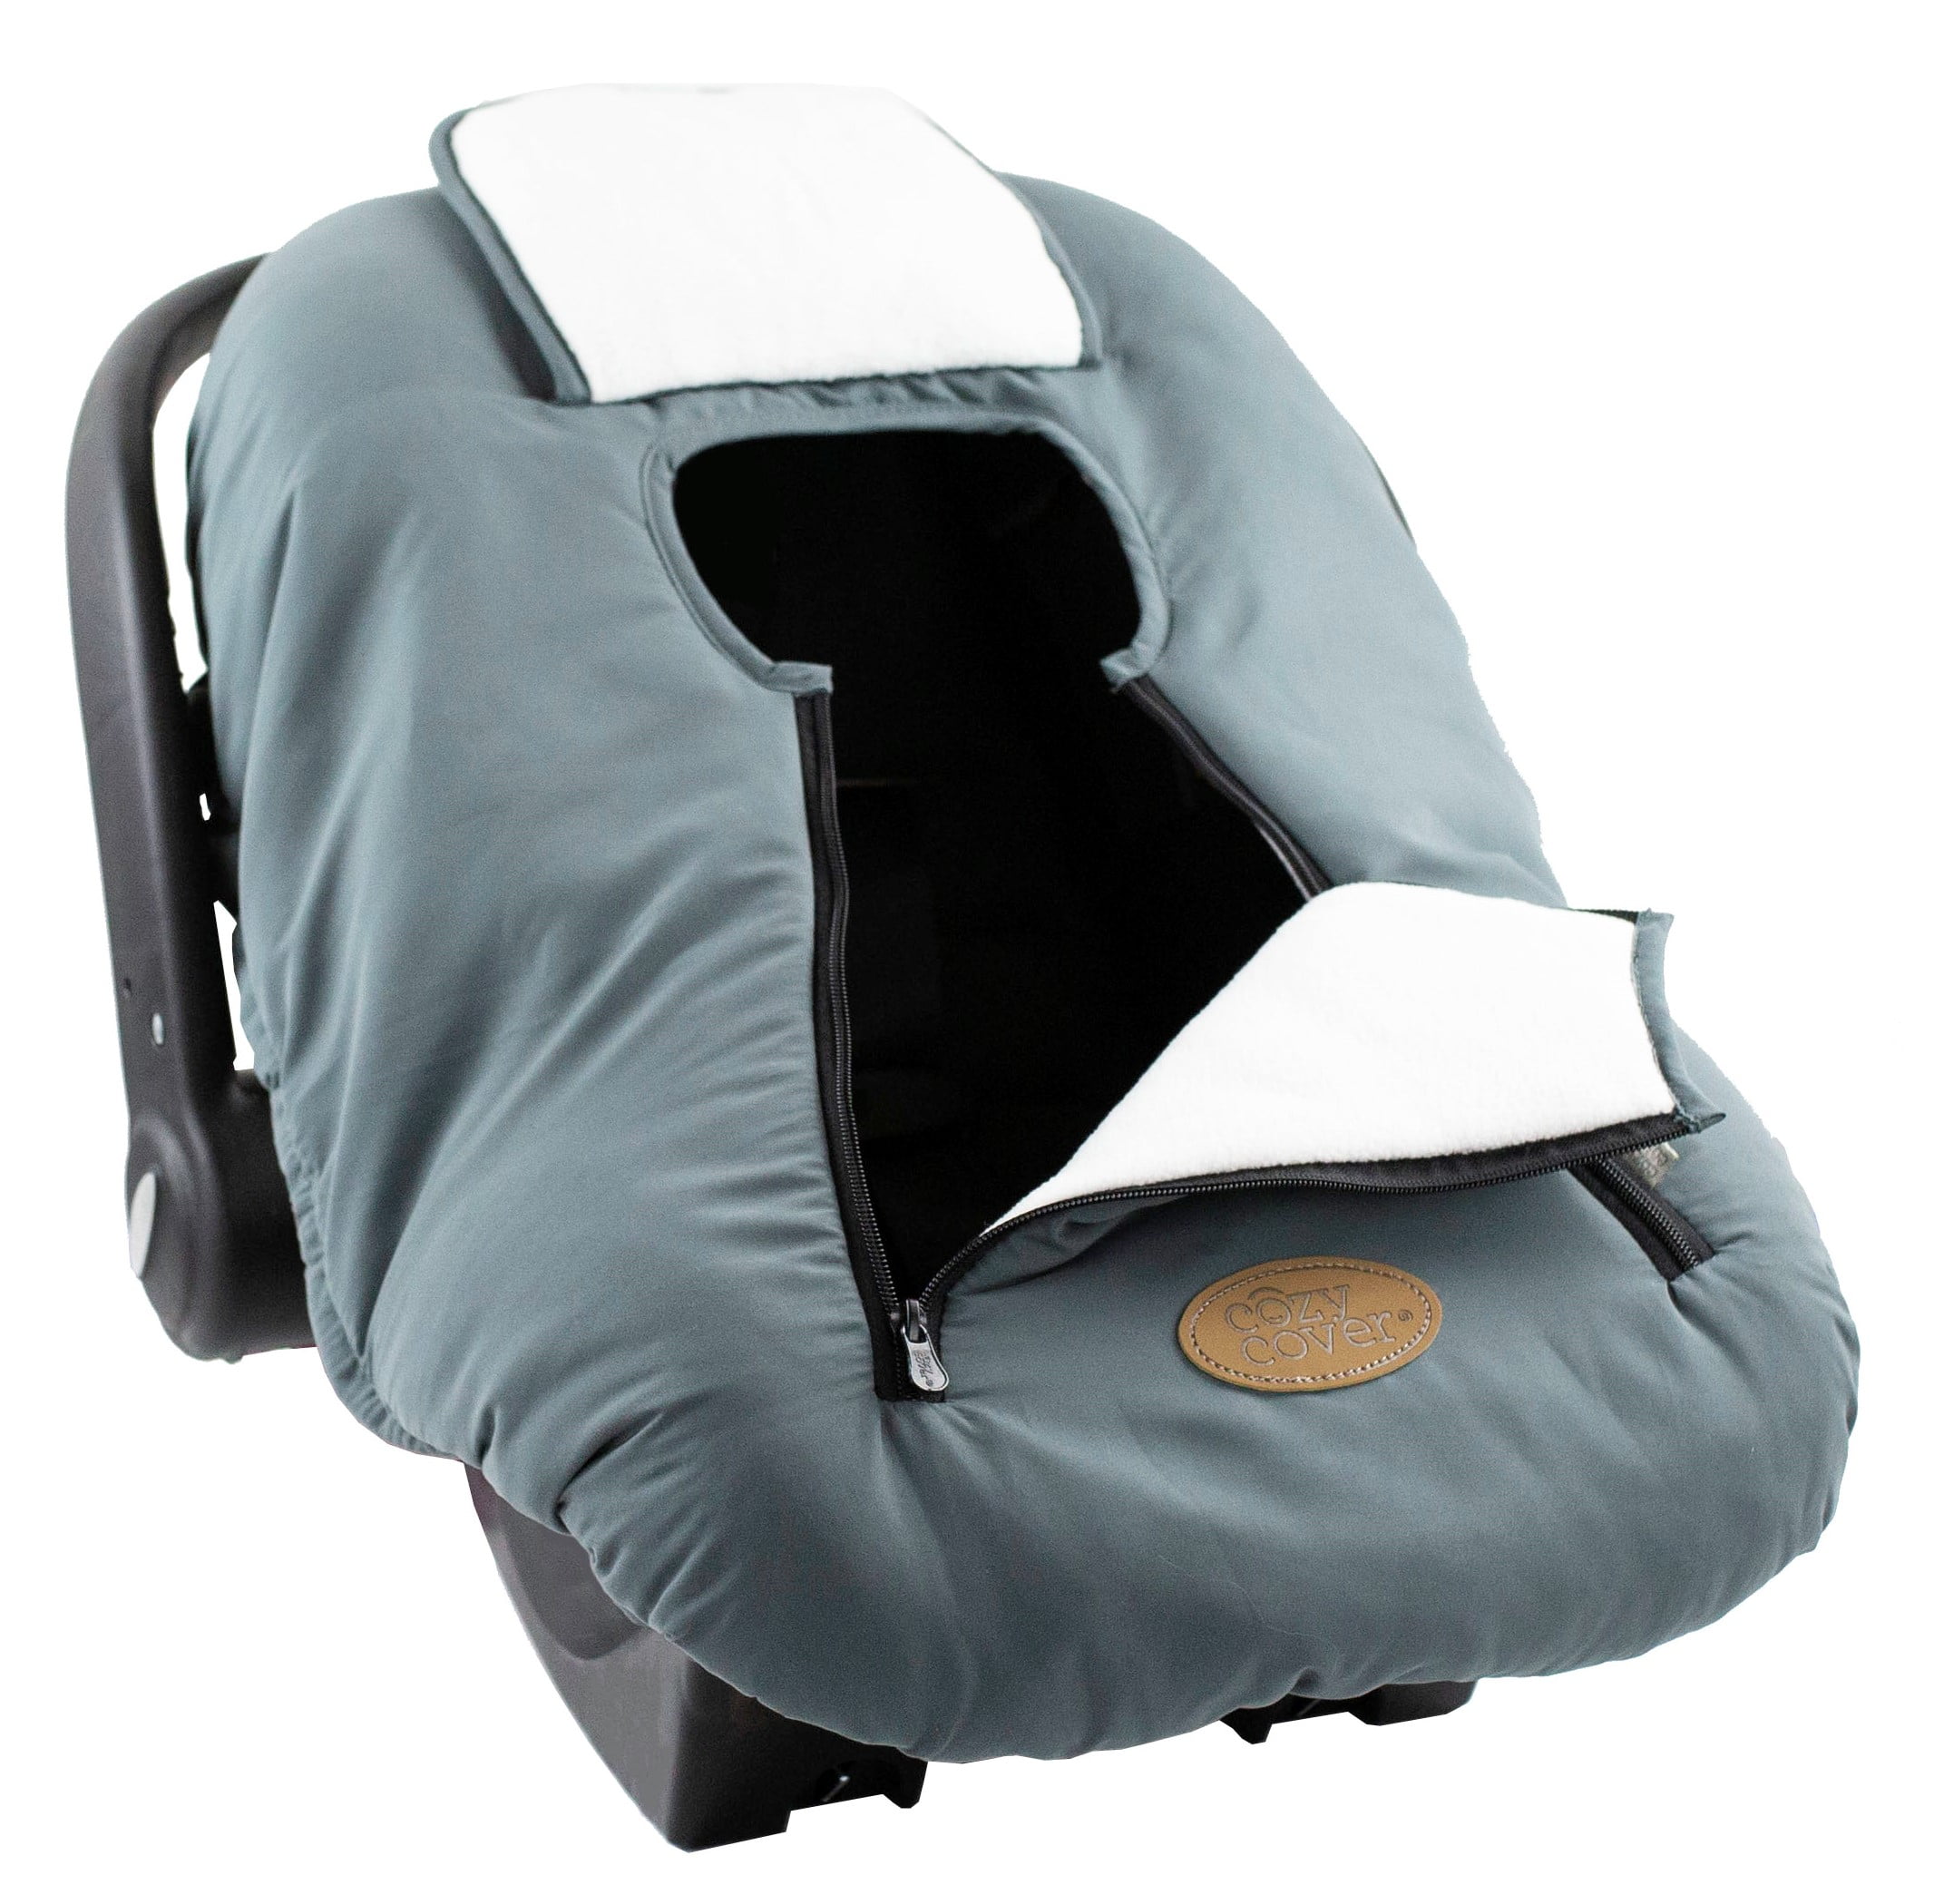 infant carrier cover